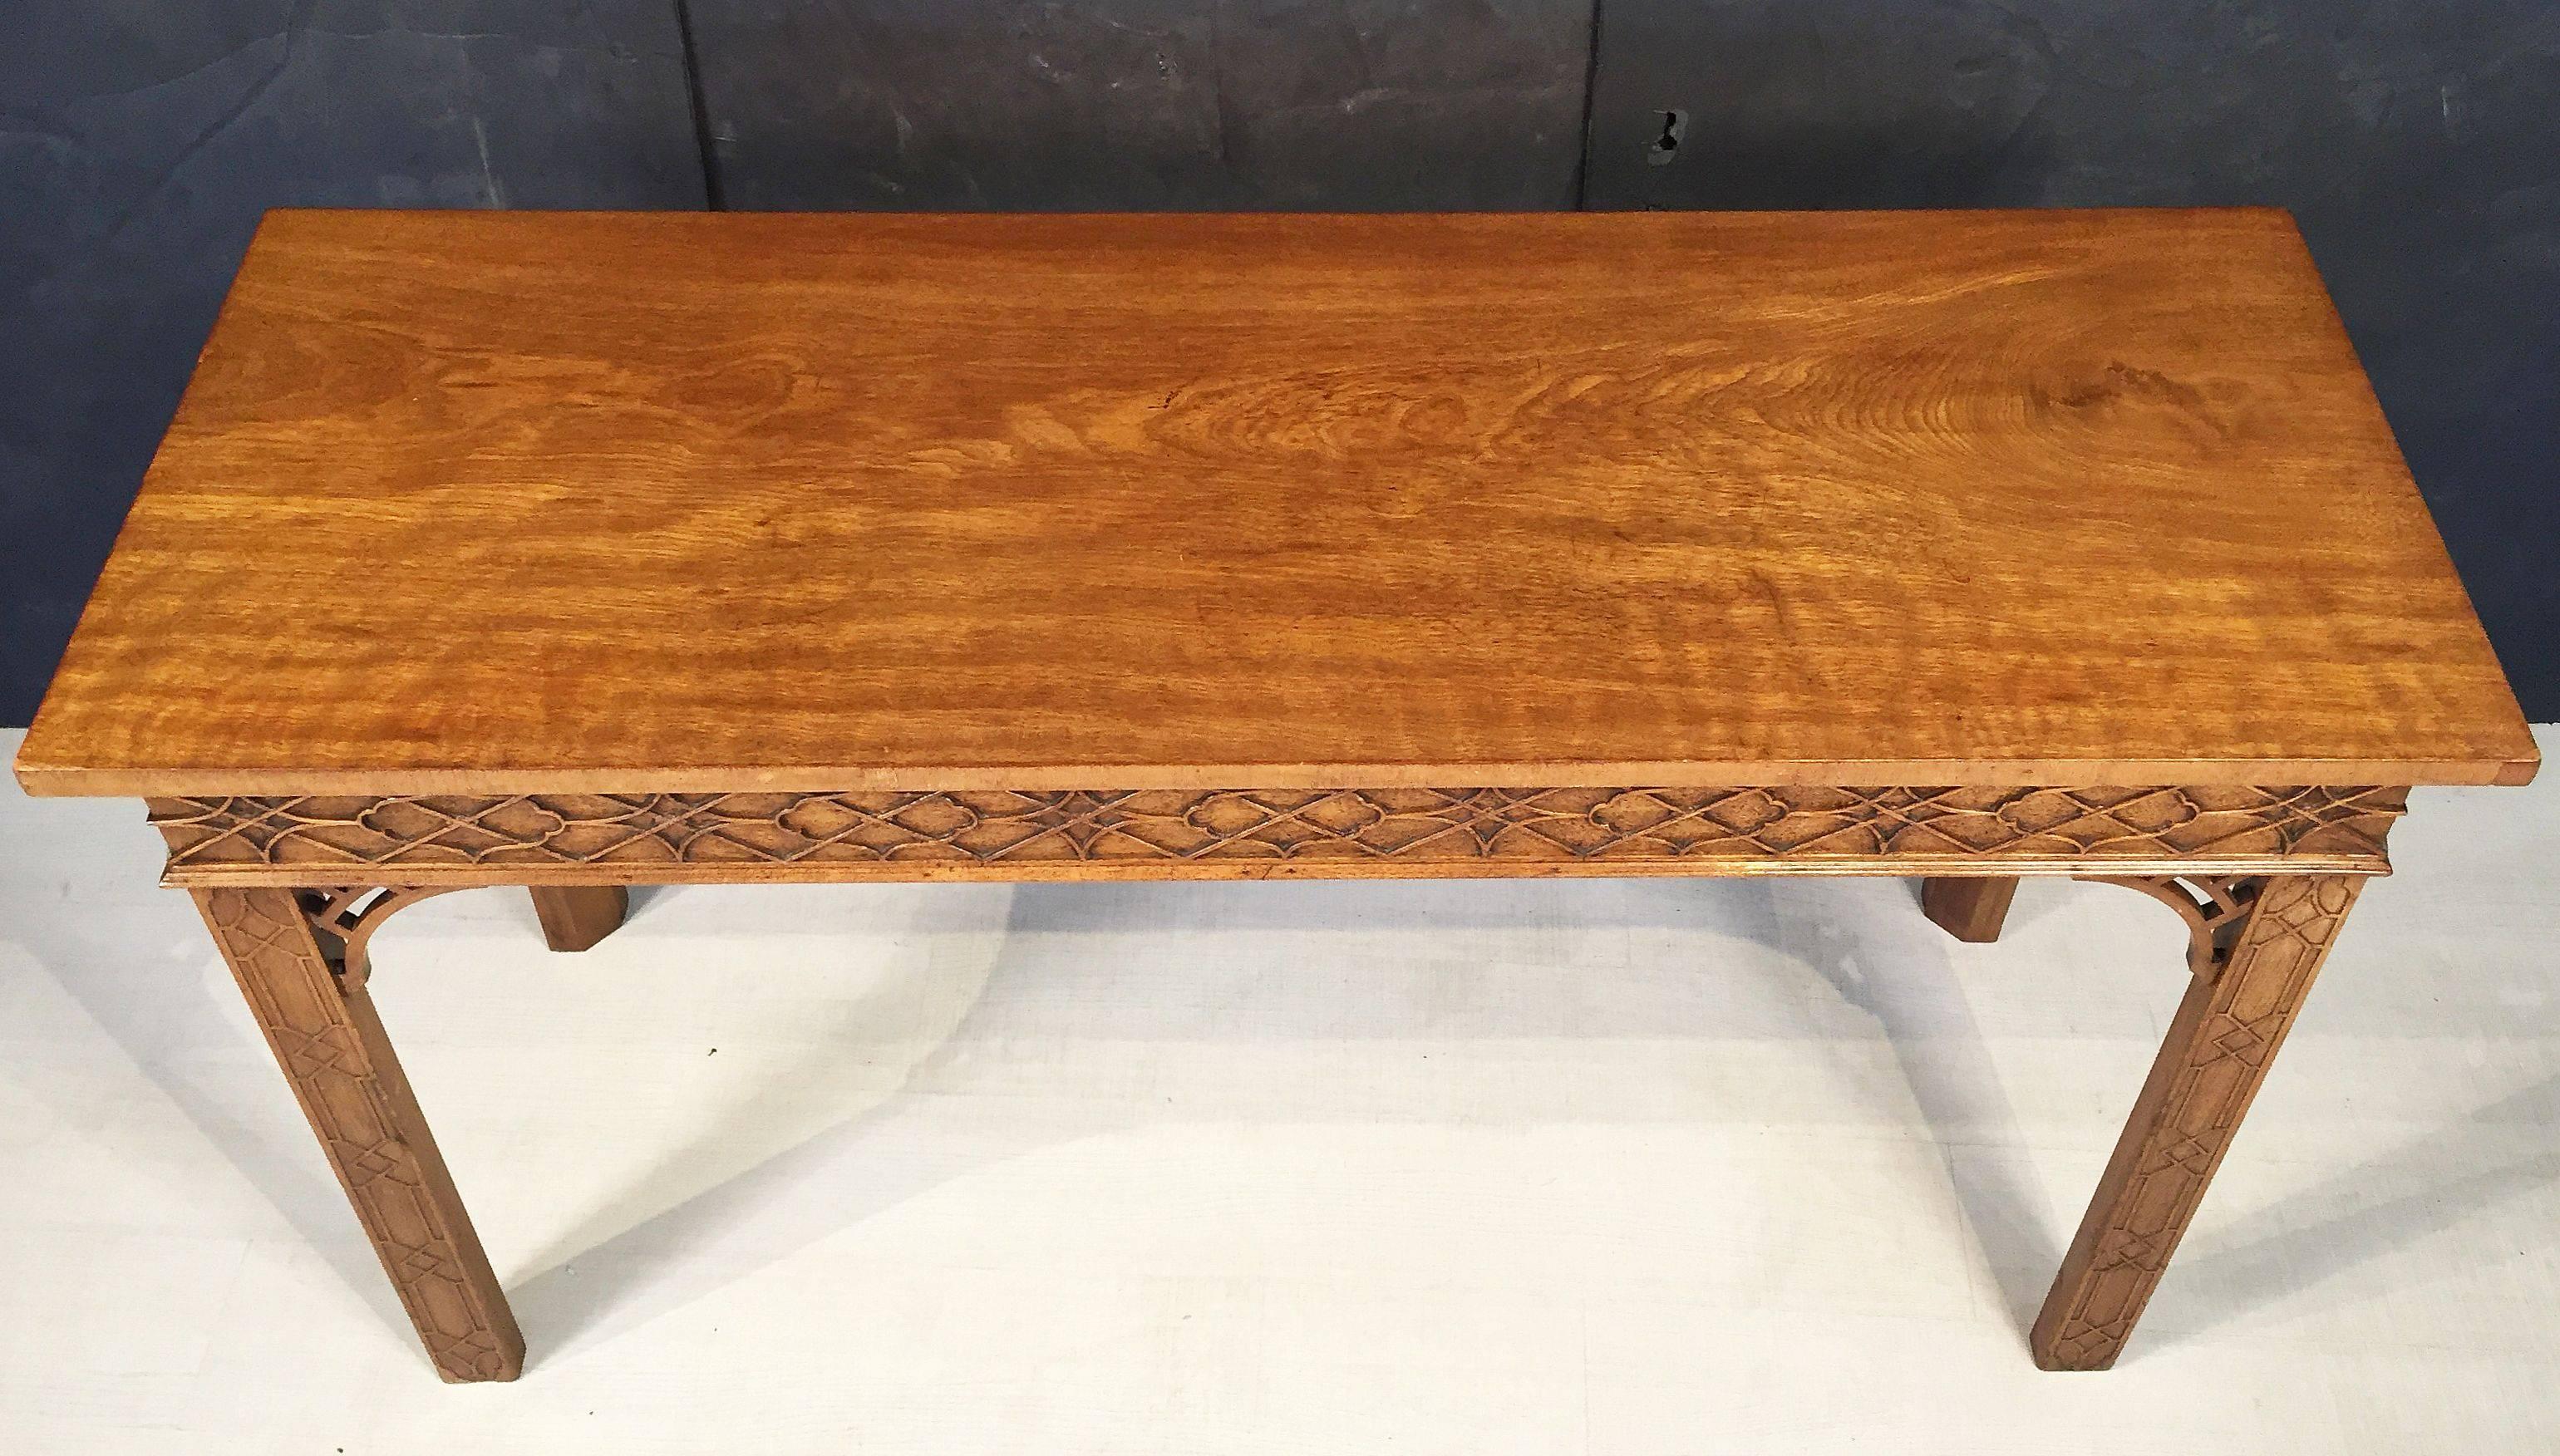 20th Century English Walnut Console Table or Server in the Chinese Chippendale Style